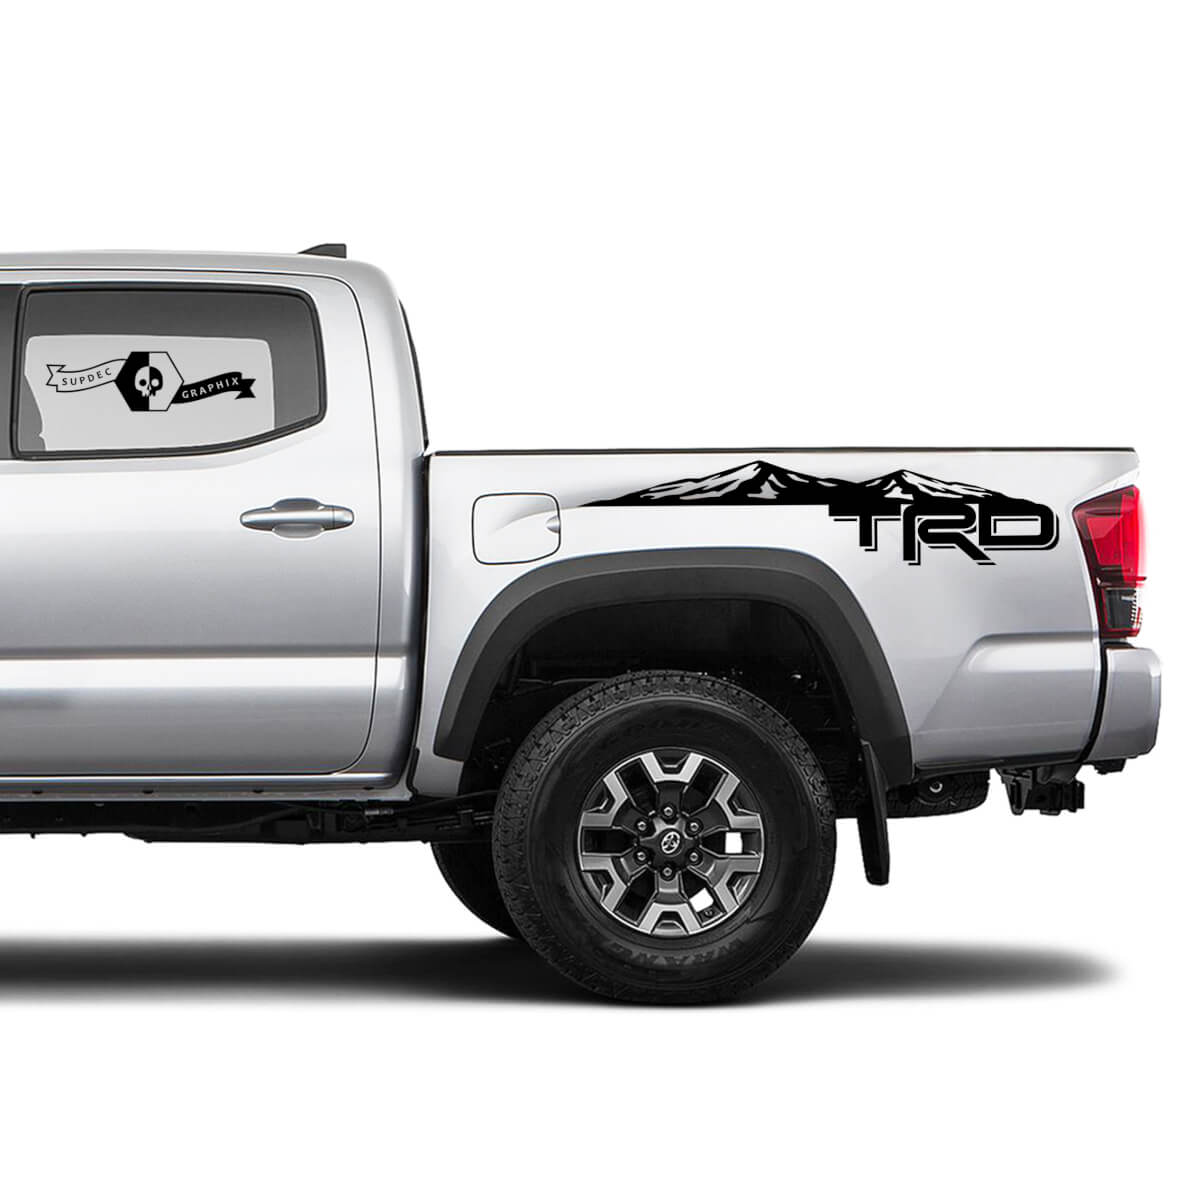 2X Tacoma Toyota TRD Off Road Truck Bed Mountains  side Decals Vinyl Stickers Montains for The Back